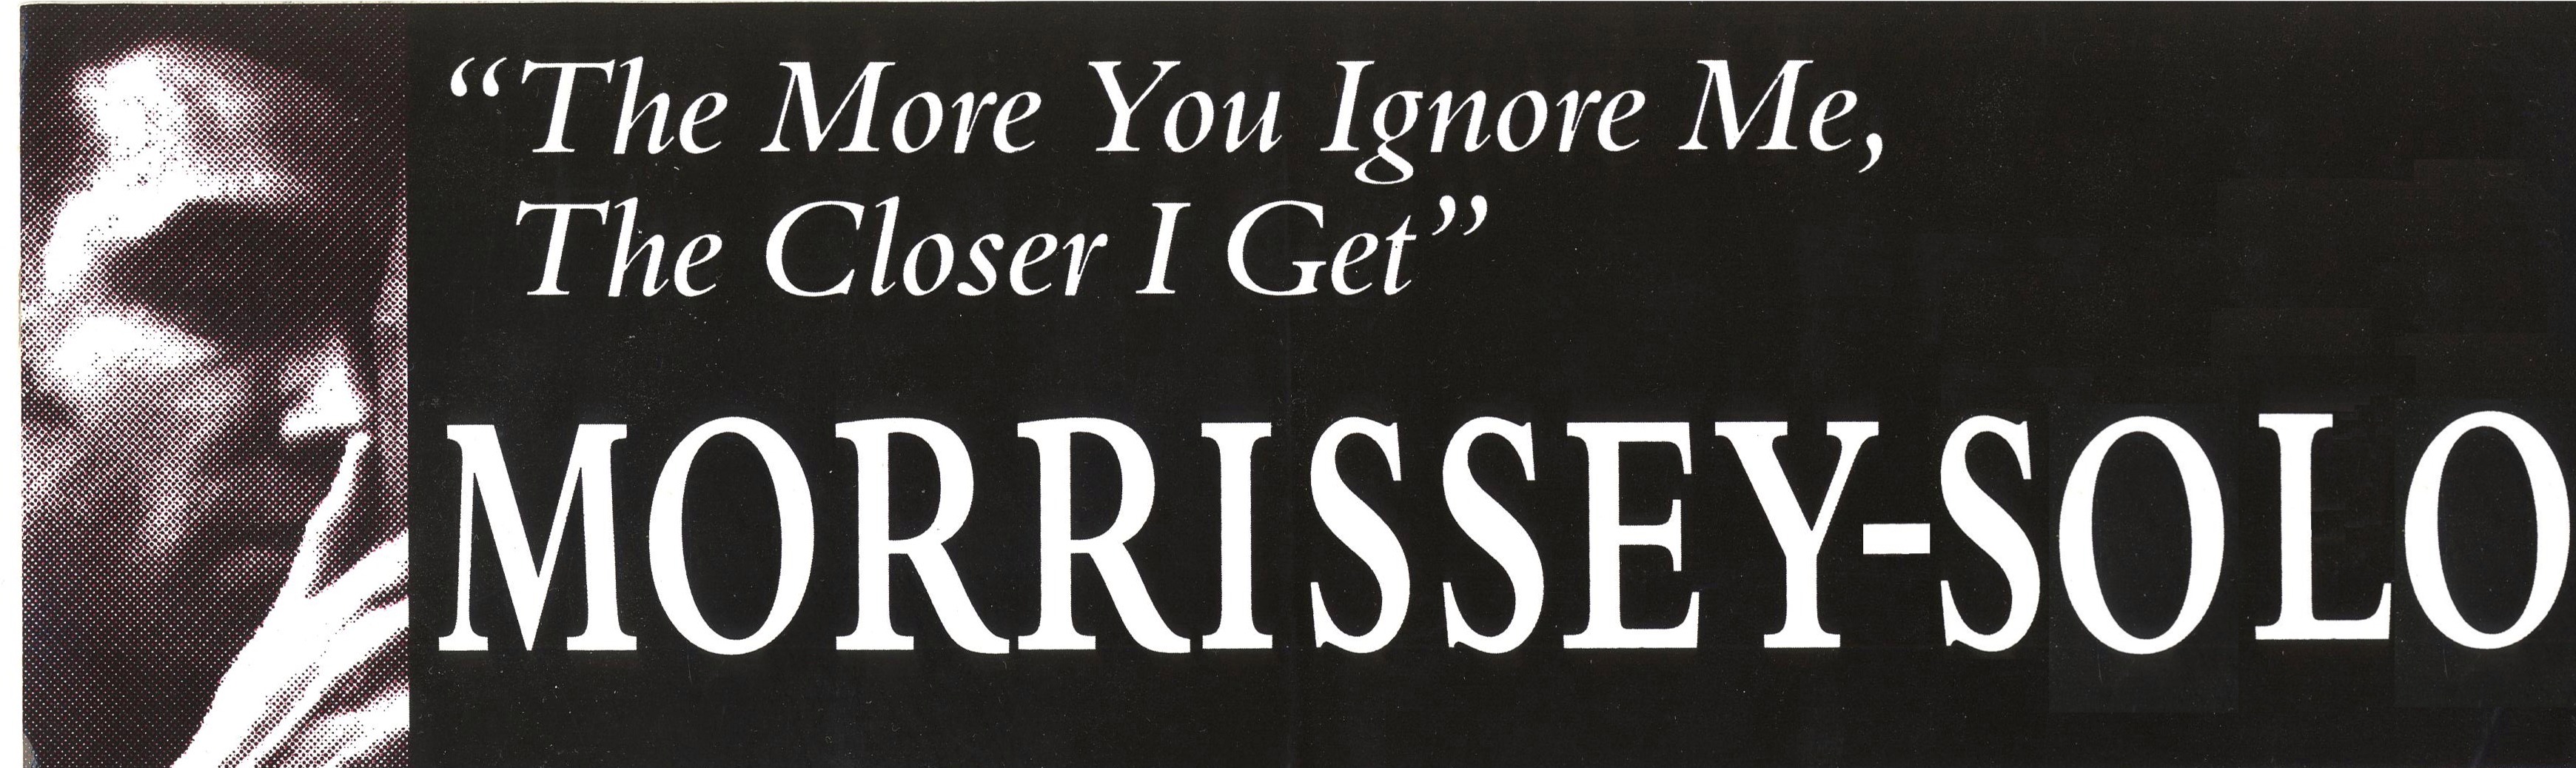 the more you ignore me sticker - banner